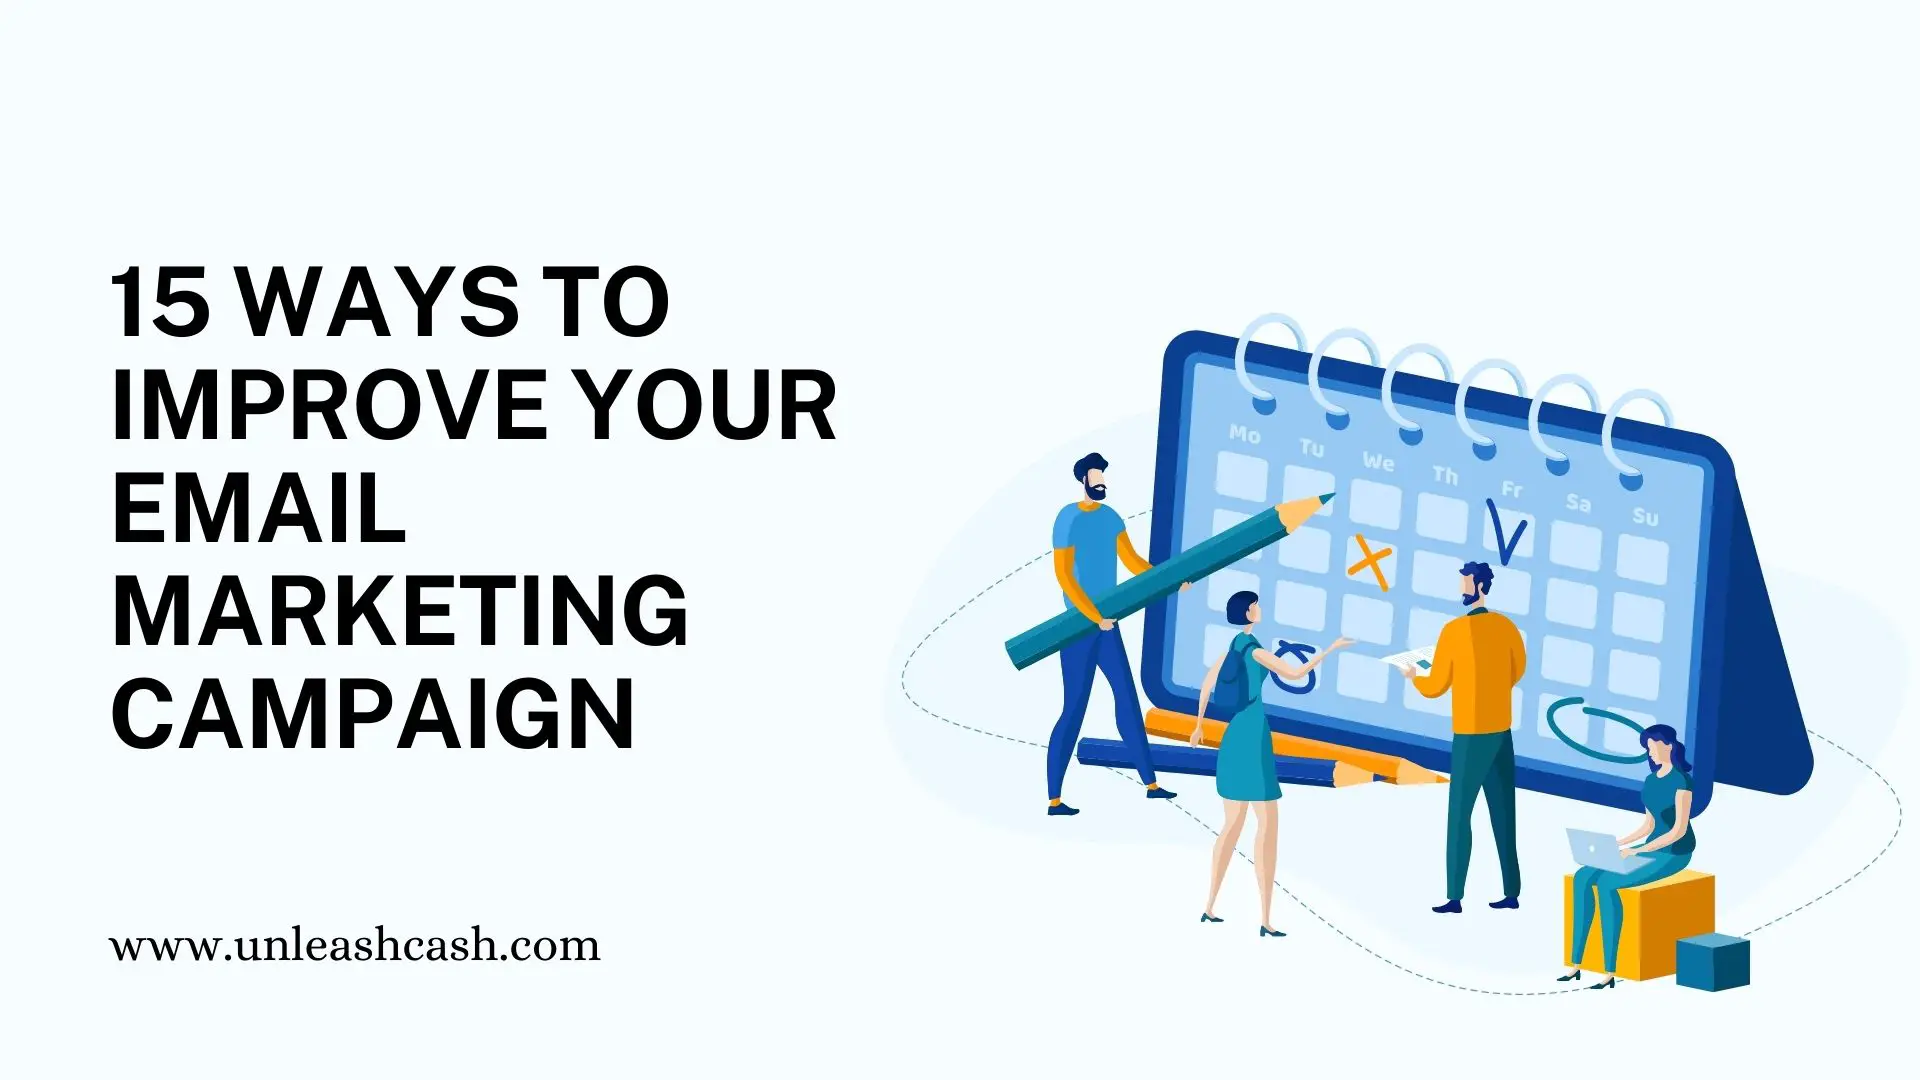 15 Ways To Improve Your Email Marketing Campaign